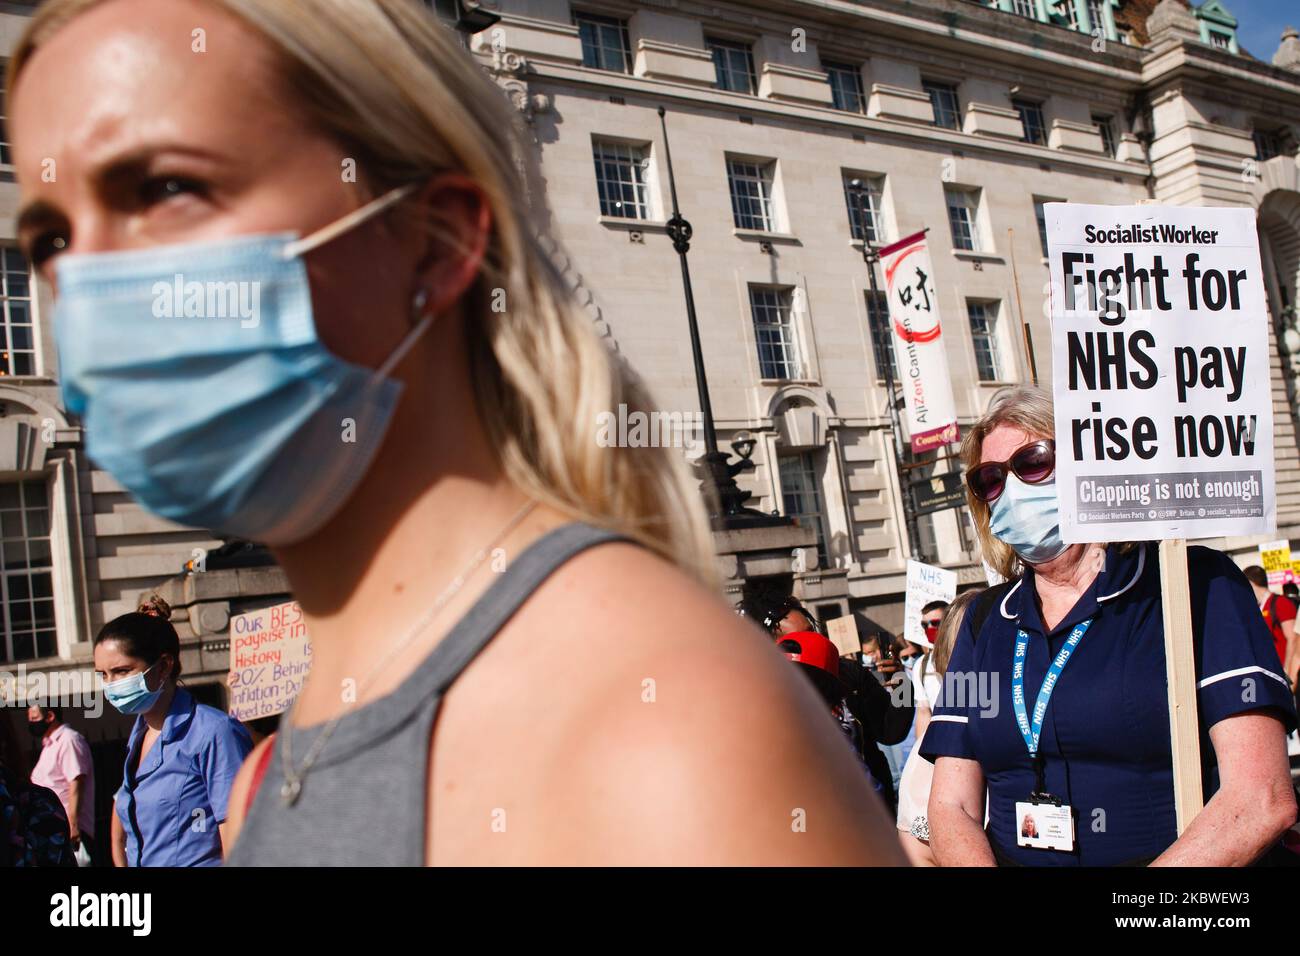 National Health Service (NHS) staff, protesting their exclusion from a recently-announced public sector pay rise, demonstrate outside St Thomas' Hospital in London, England, on July 29, 2020. Around 900,000 public sector workers across the UK are set to receive above-inflation pay rises this year as a gesture of thanks from the Treasury for their efforts during the coronavirus pandemic. Within the NHS, doctors and dentists will benefit from the rises, but nurses and other frontline staff have been excluded owing to a three-year pay deal they negotiated in 2018. Nursing activists say that so-ca Stock Photo